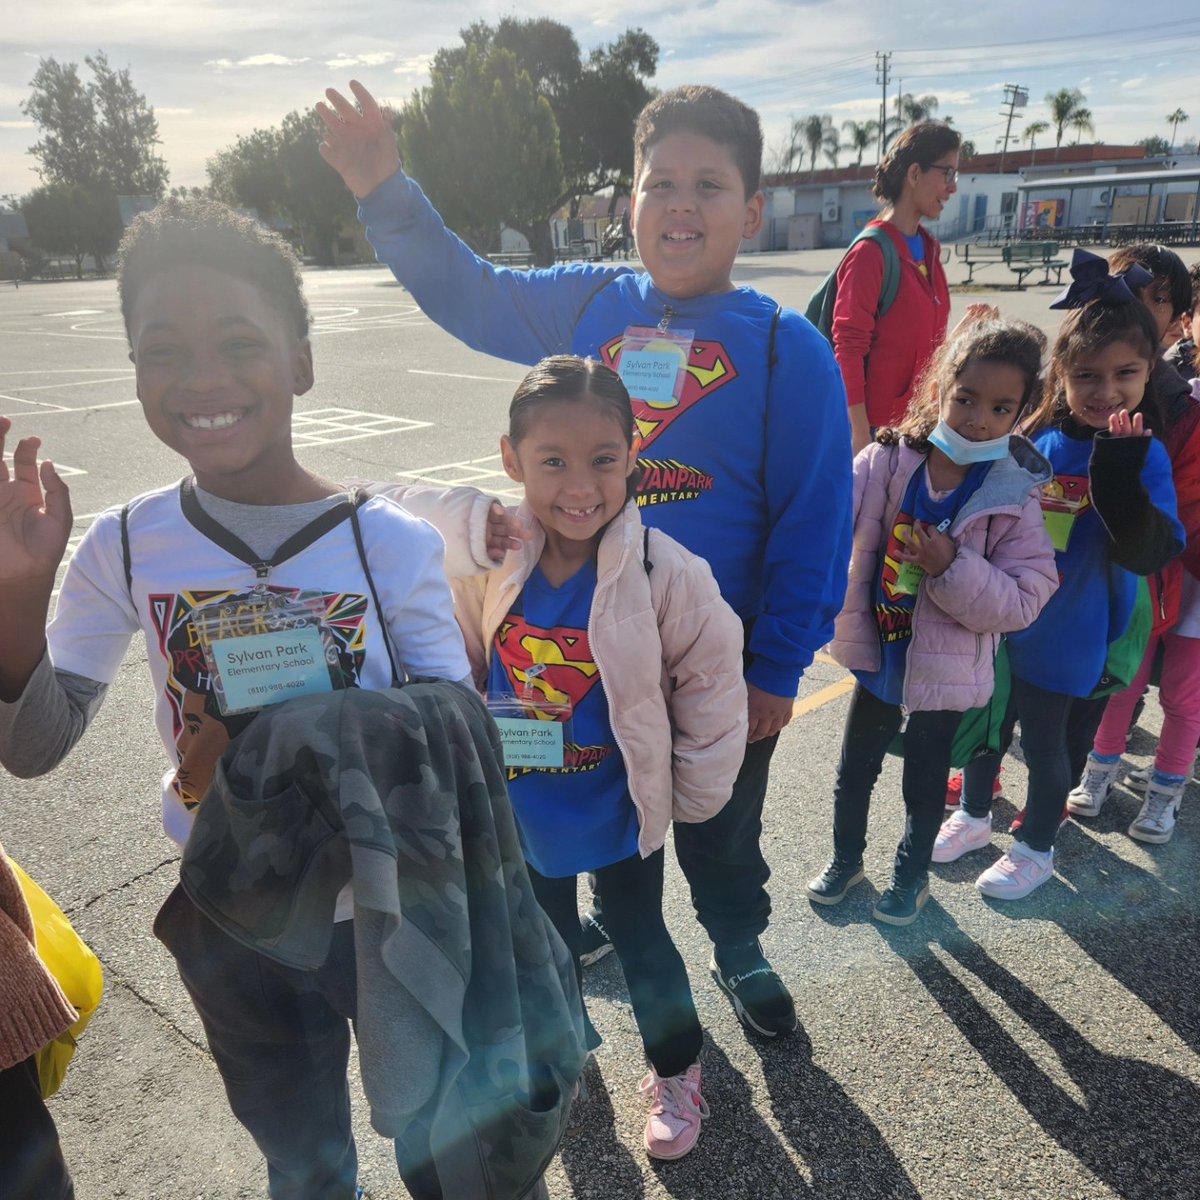 This week, our first graders visited the Science Center to learn about ecosystems. We are all connected in the world! 🌍 #learningisfun 🌲🌳🐛🦋🐦🐁🦉🦅 @LASchools @LASchoolsNorth @ScottAtLAUSD @MsDamonte @LAUSD_Achieve